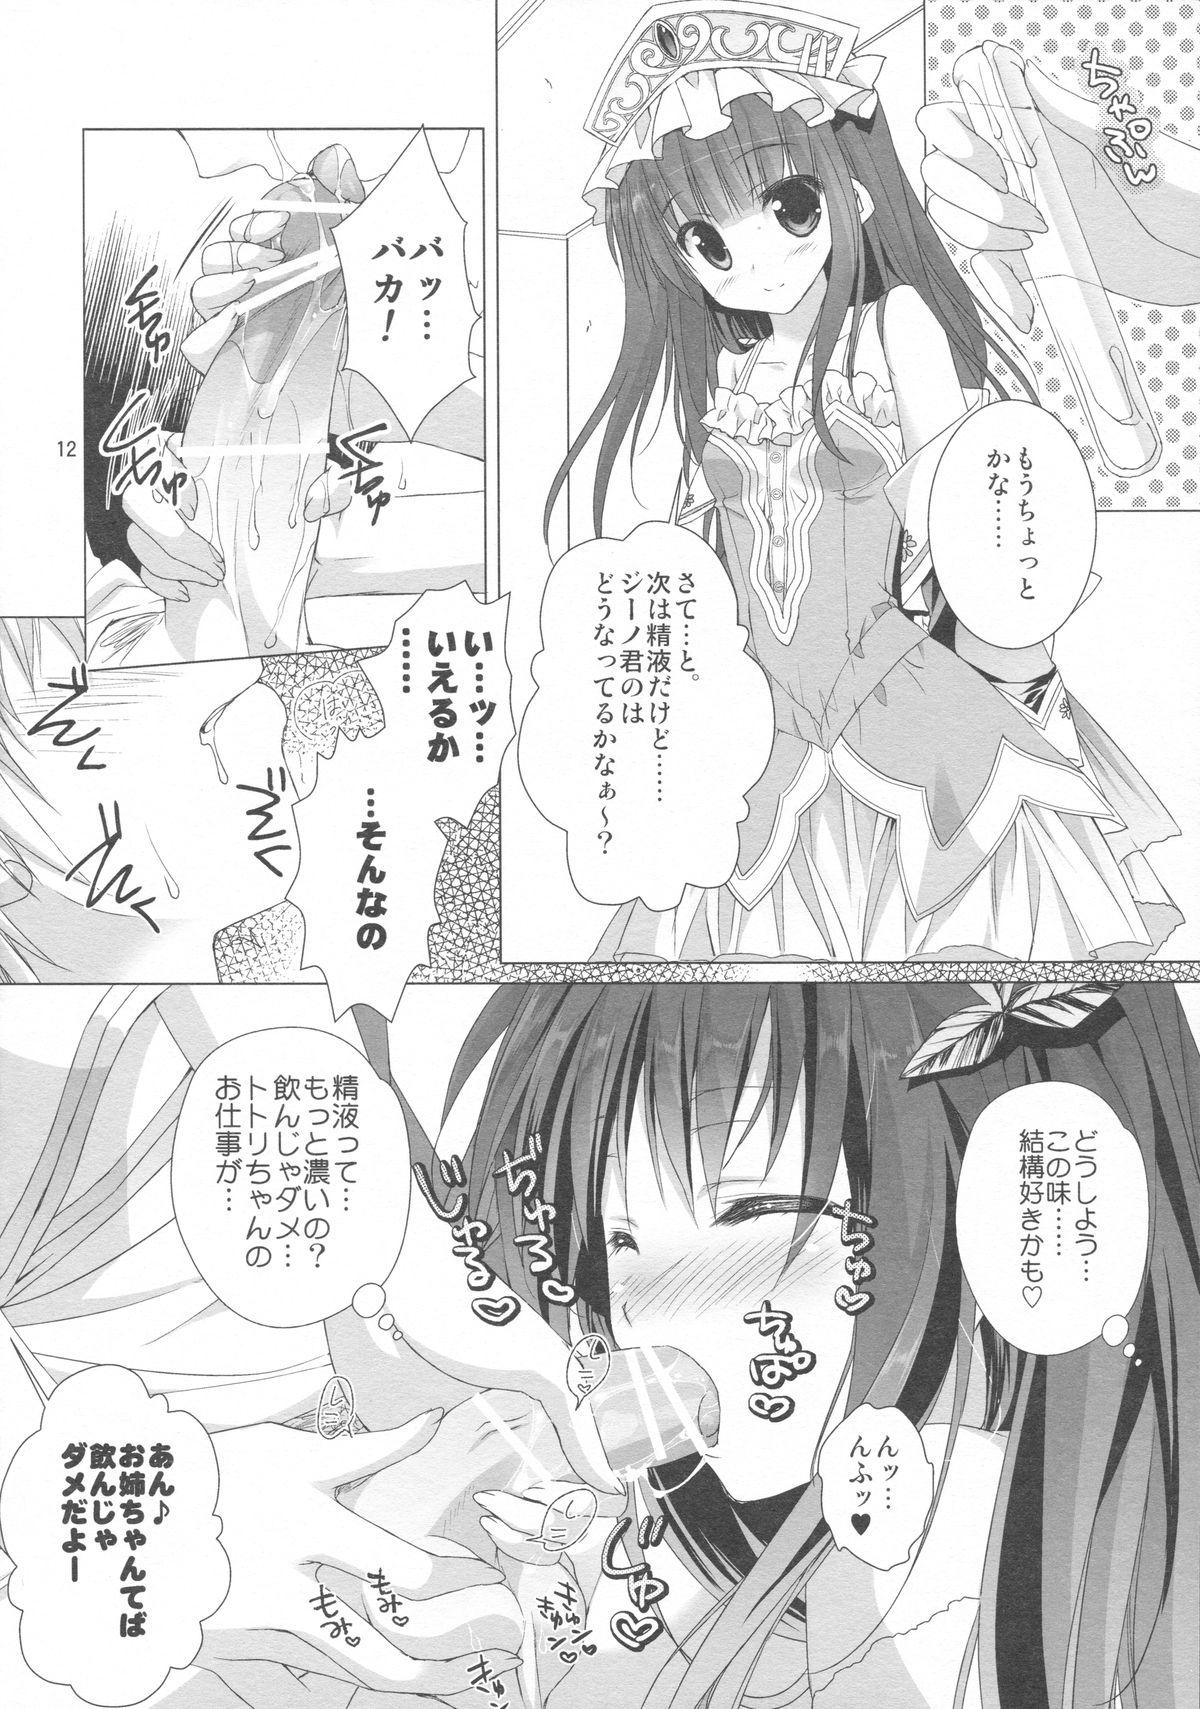 Toes 2-Shuume no True End - Atelier totori Girl Fucked Hard - Page 10